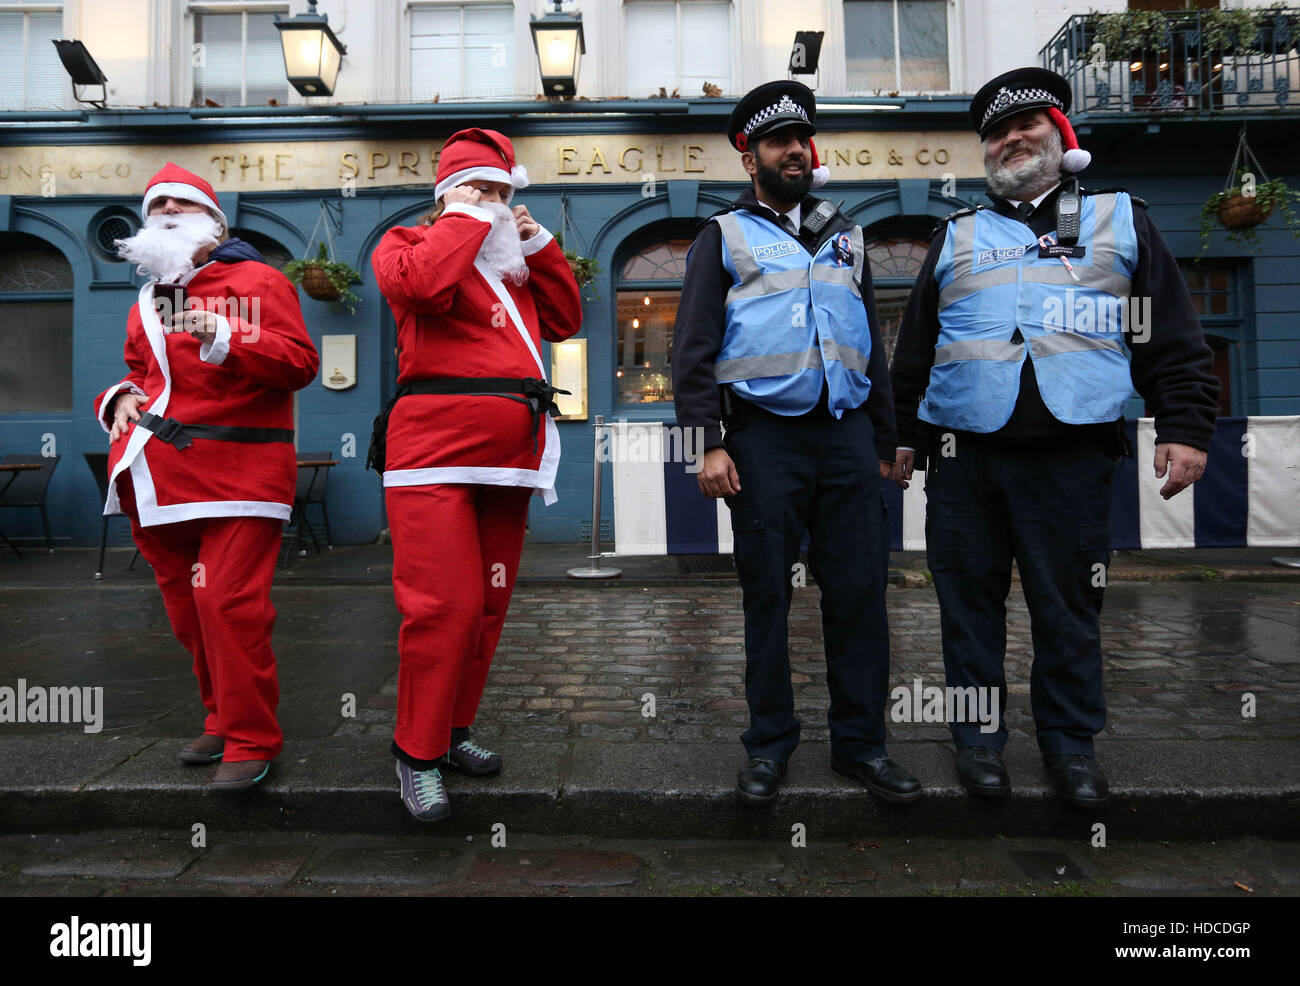 Police officers wearing santa hats underneath their caps, outside the Spread Eagle pub on Albert Street in Camden, north London, as hundreds of revellers take part in the Santacon Christmas parade. Stock Photo